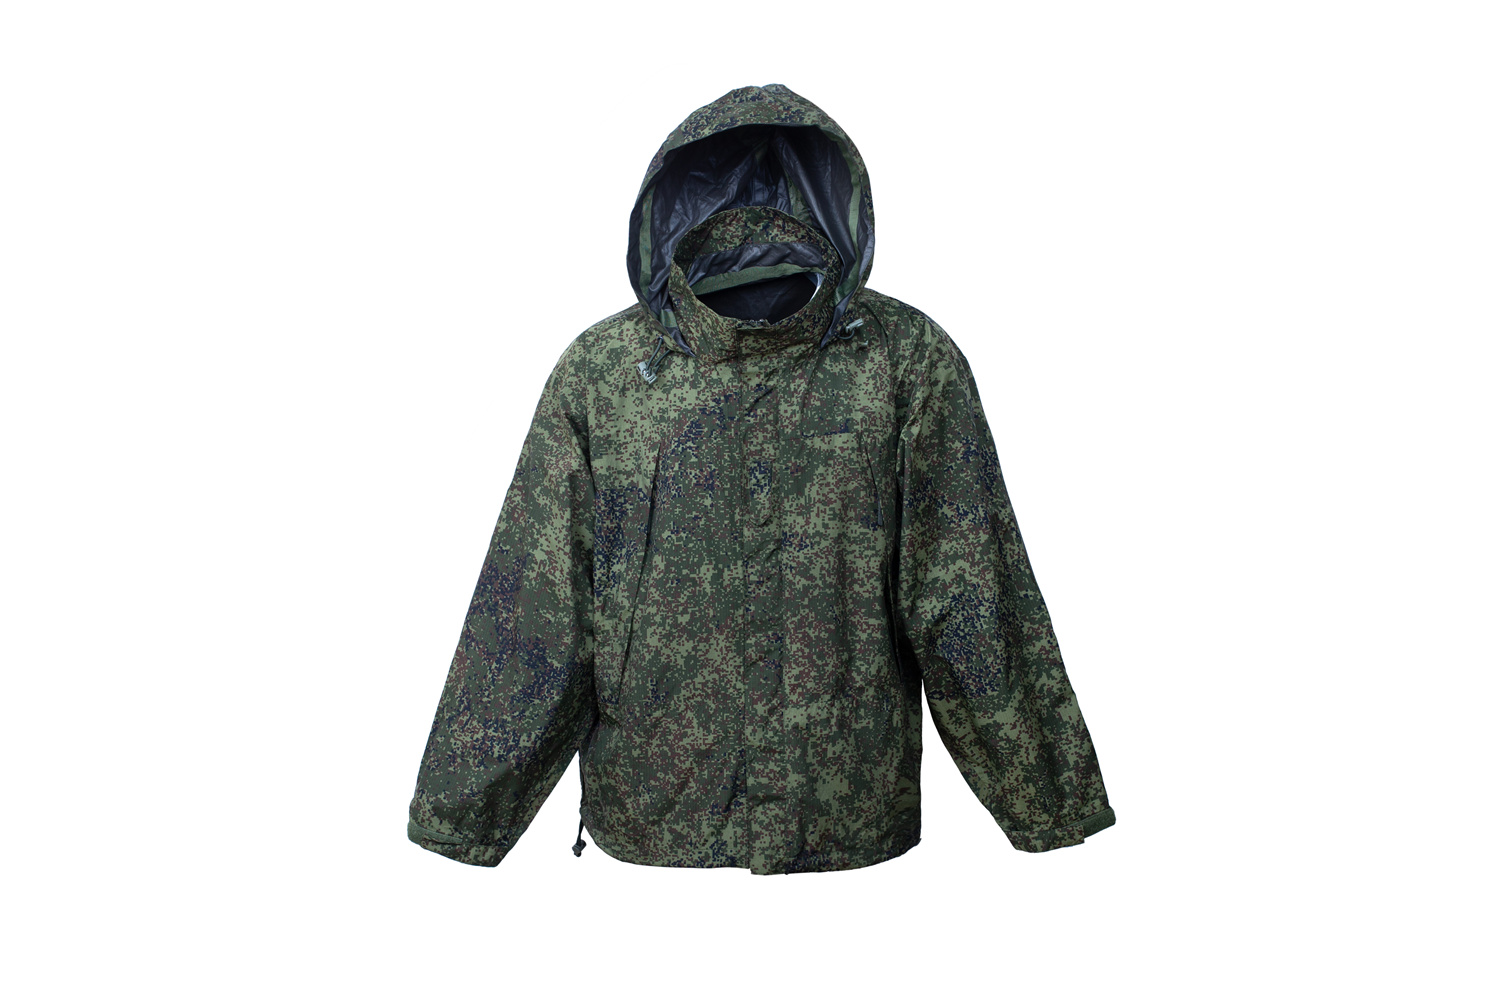 The camouflage windproof coat